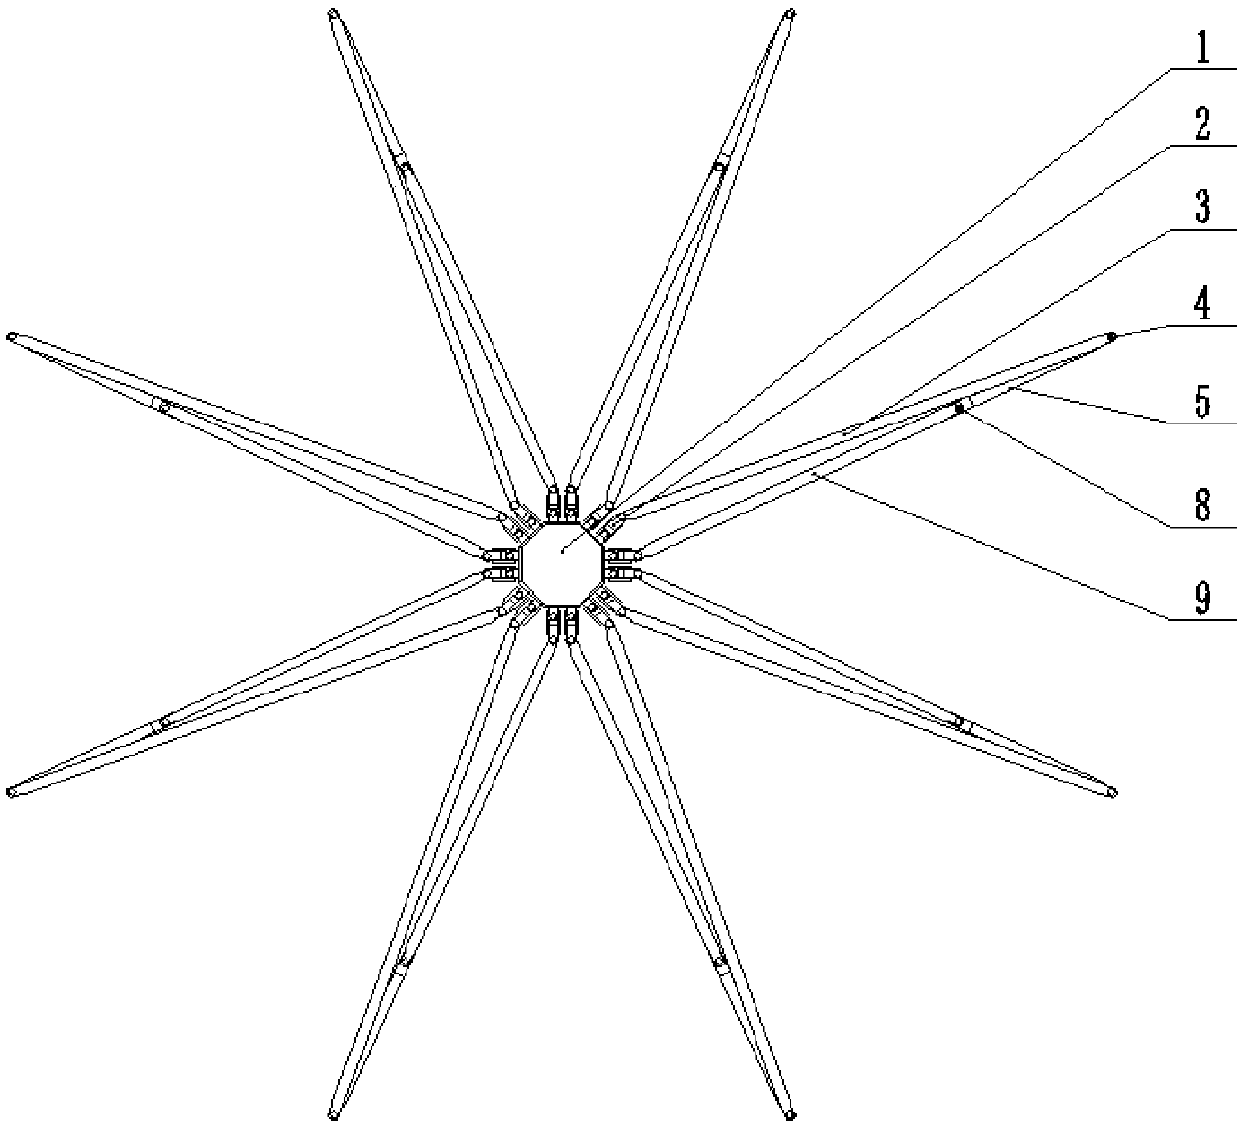 Space folding and extending mechanism with five-rod mechanisms as extensible units